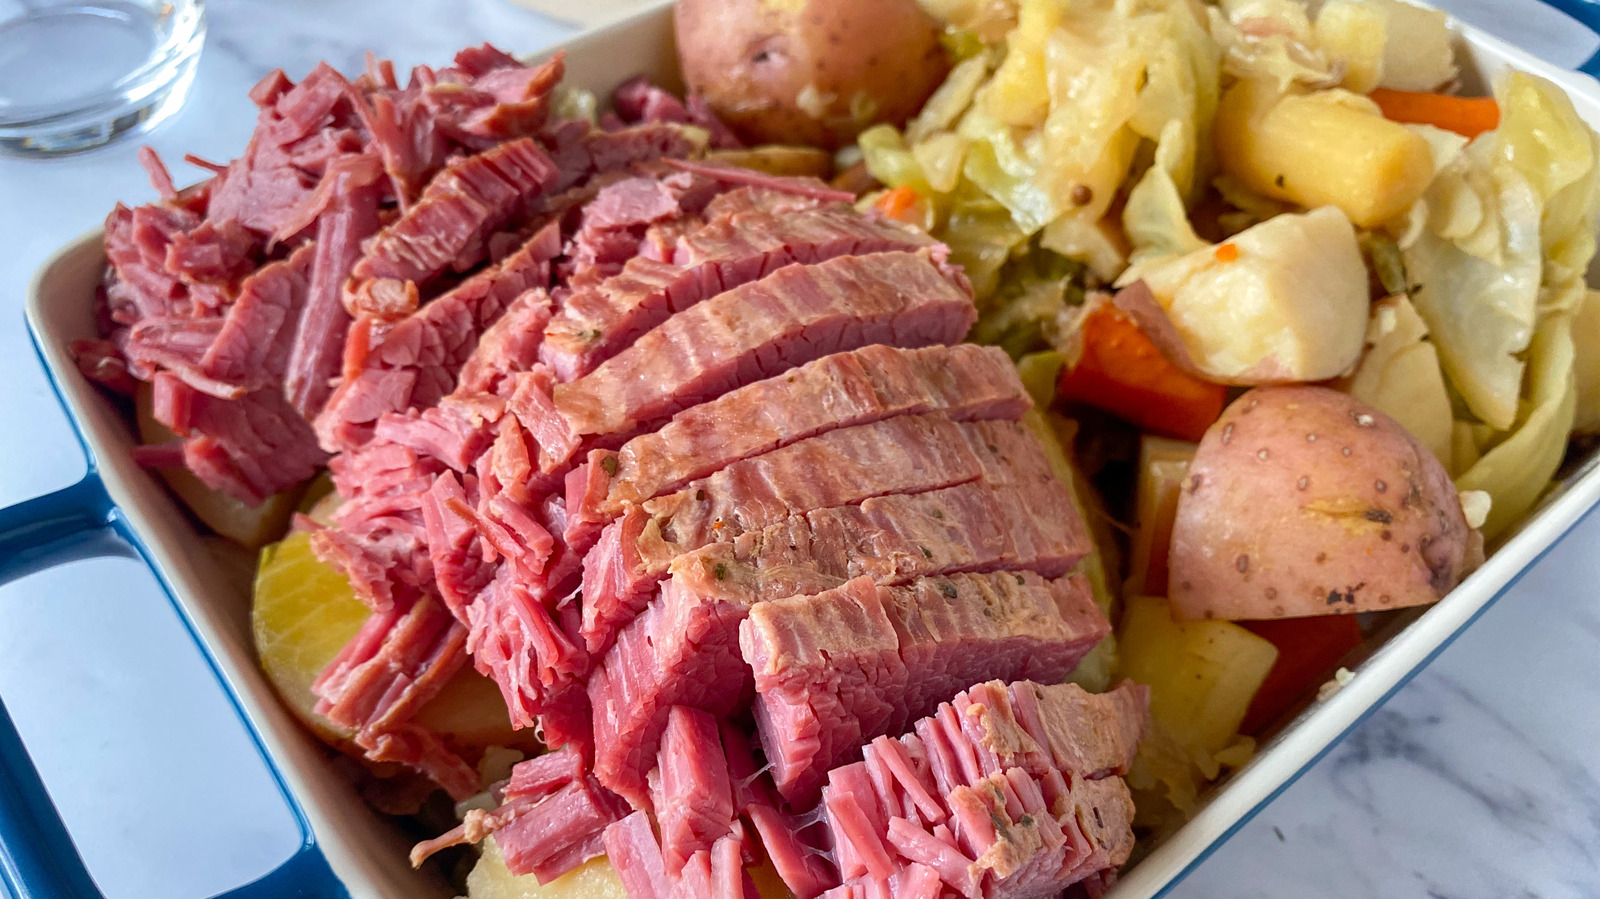 https://www.mashed.com/img/gallery/instant-pot-corned-beef-and-cabbage-recipe/l-intro-1628511520.jpg